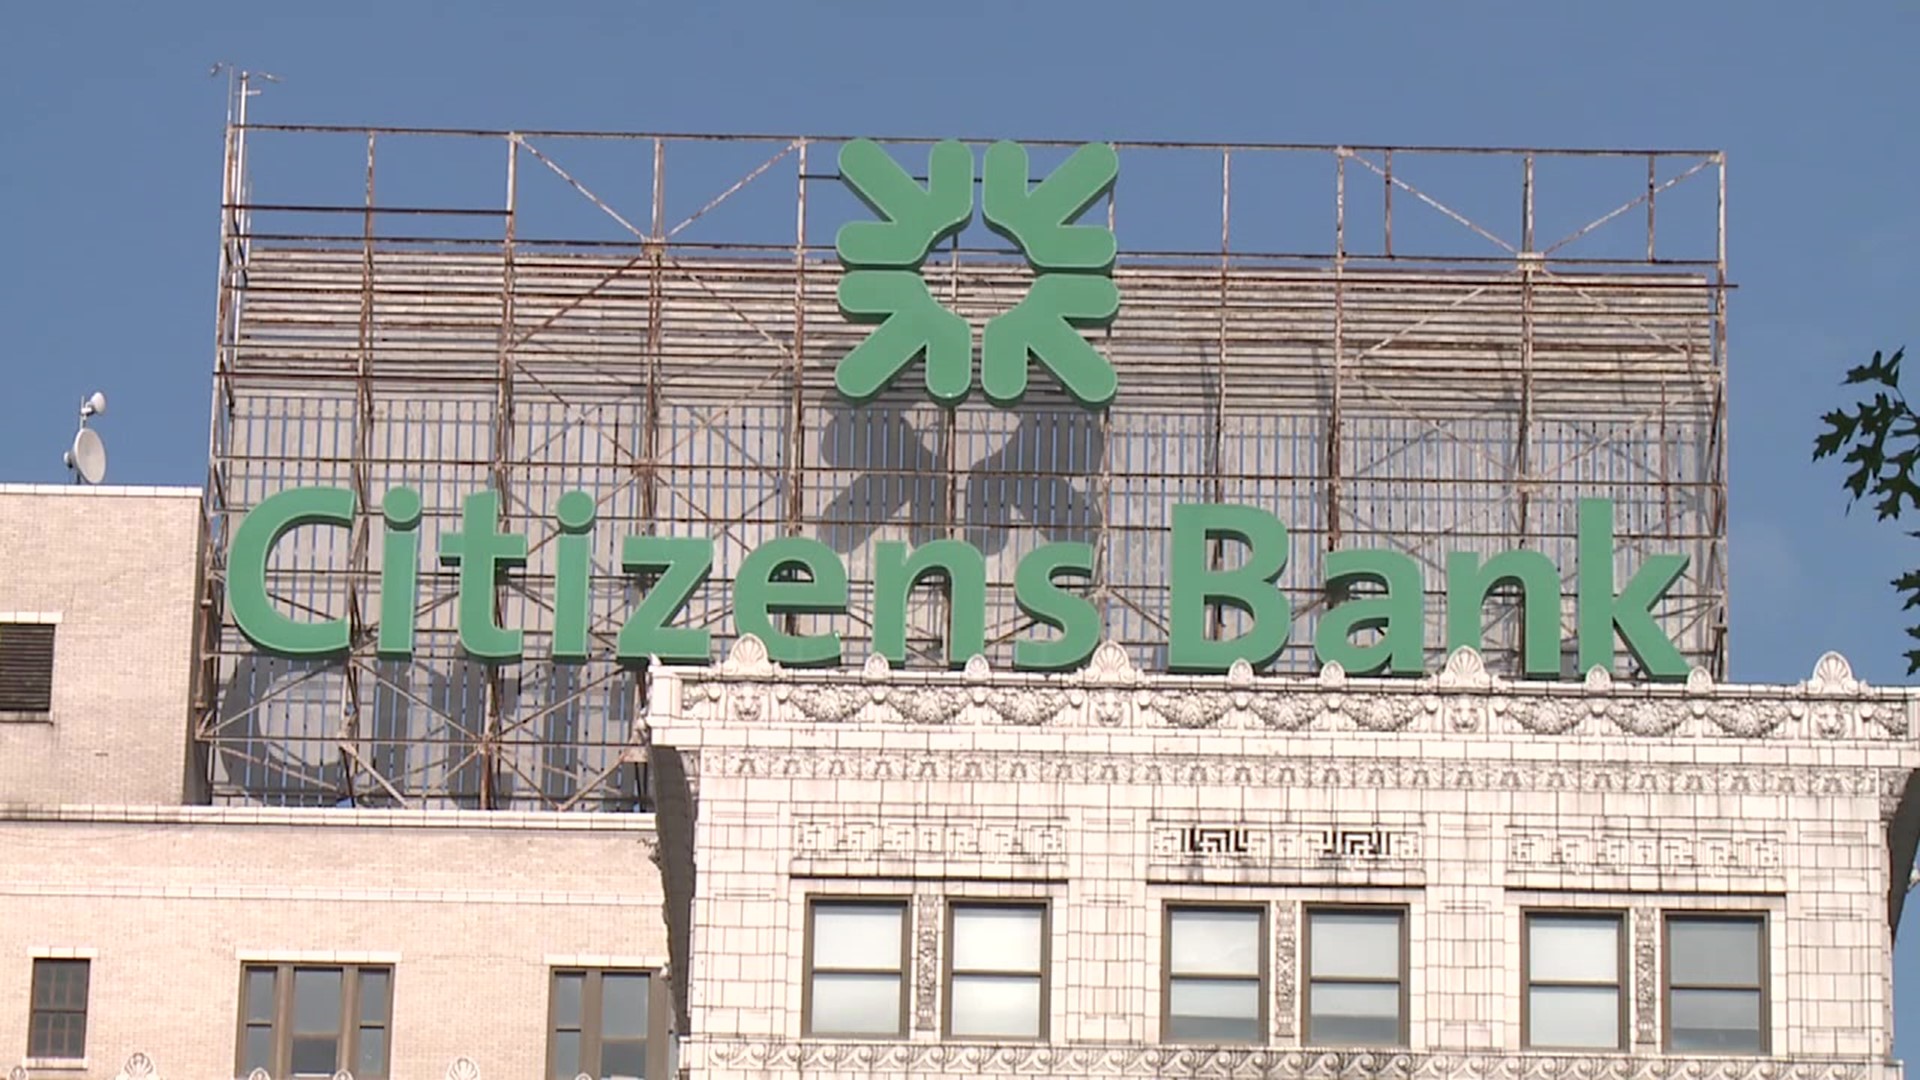 The sign for the bank, which is visible for miles around Wilkes-Barre, is coming down seven years after the company left the building.